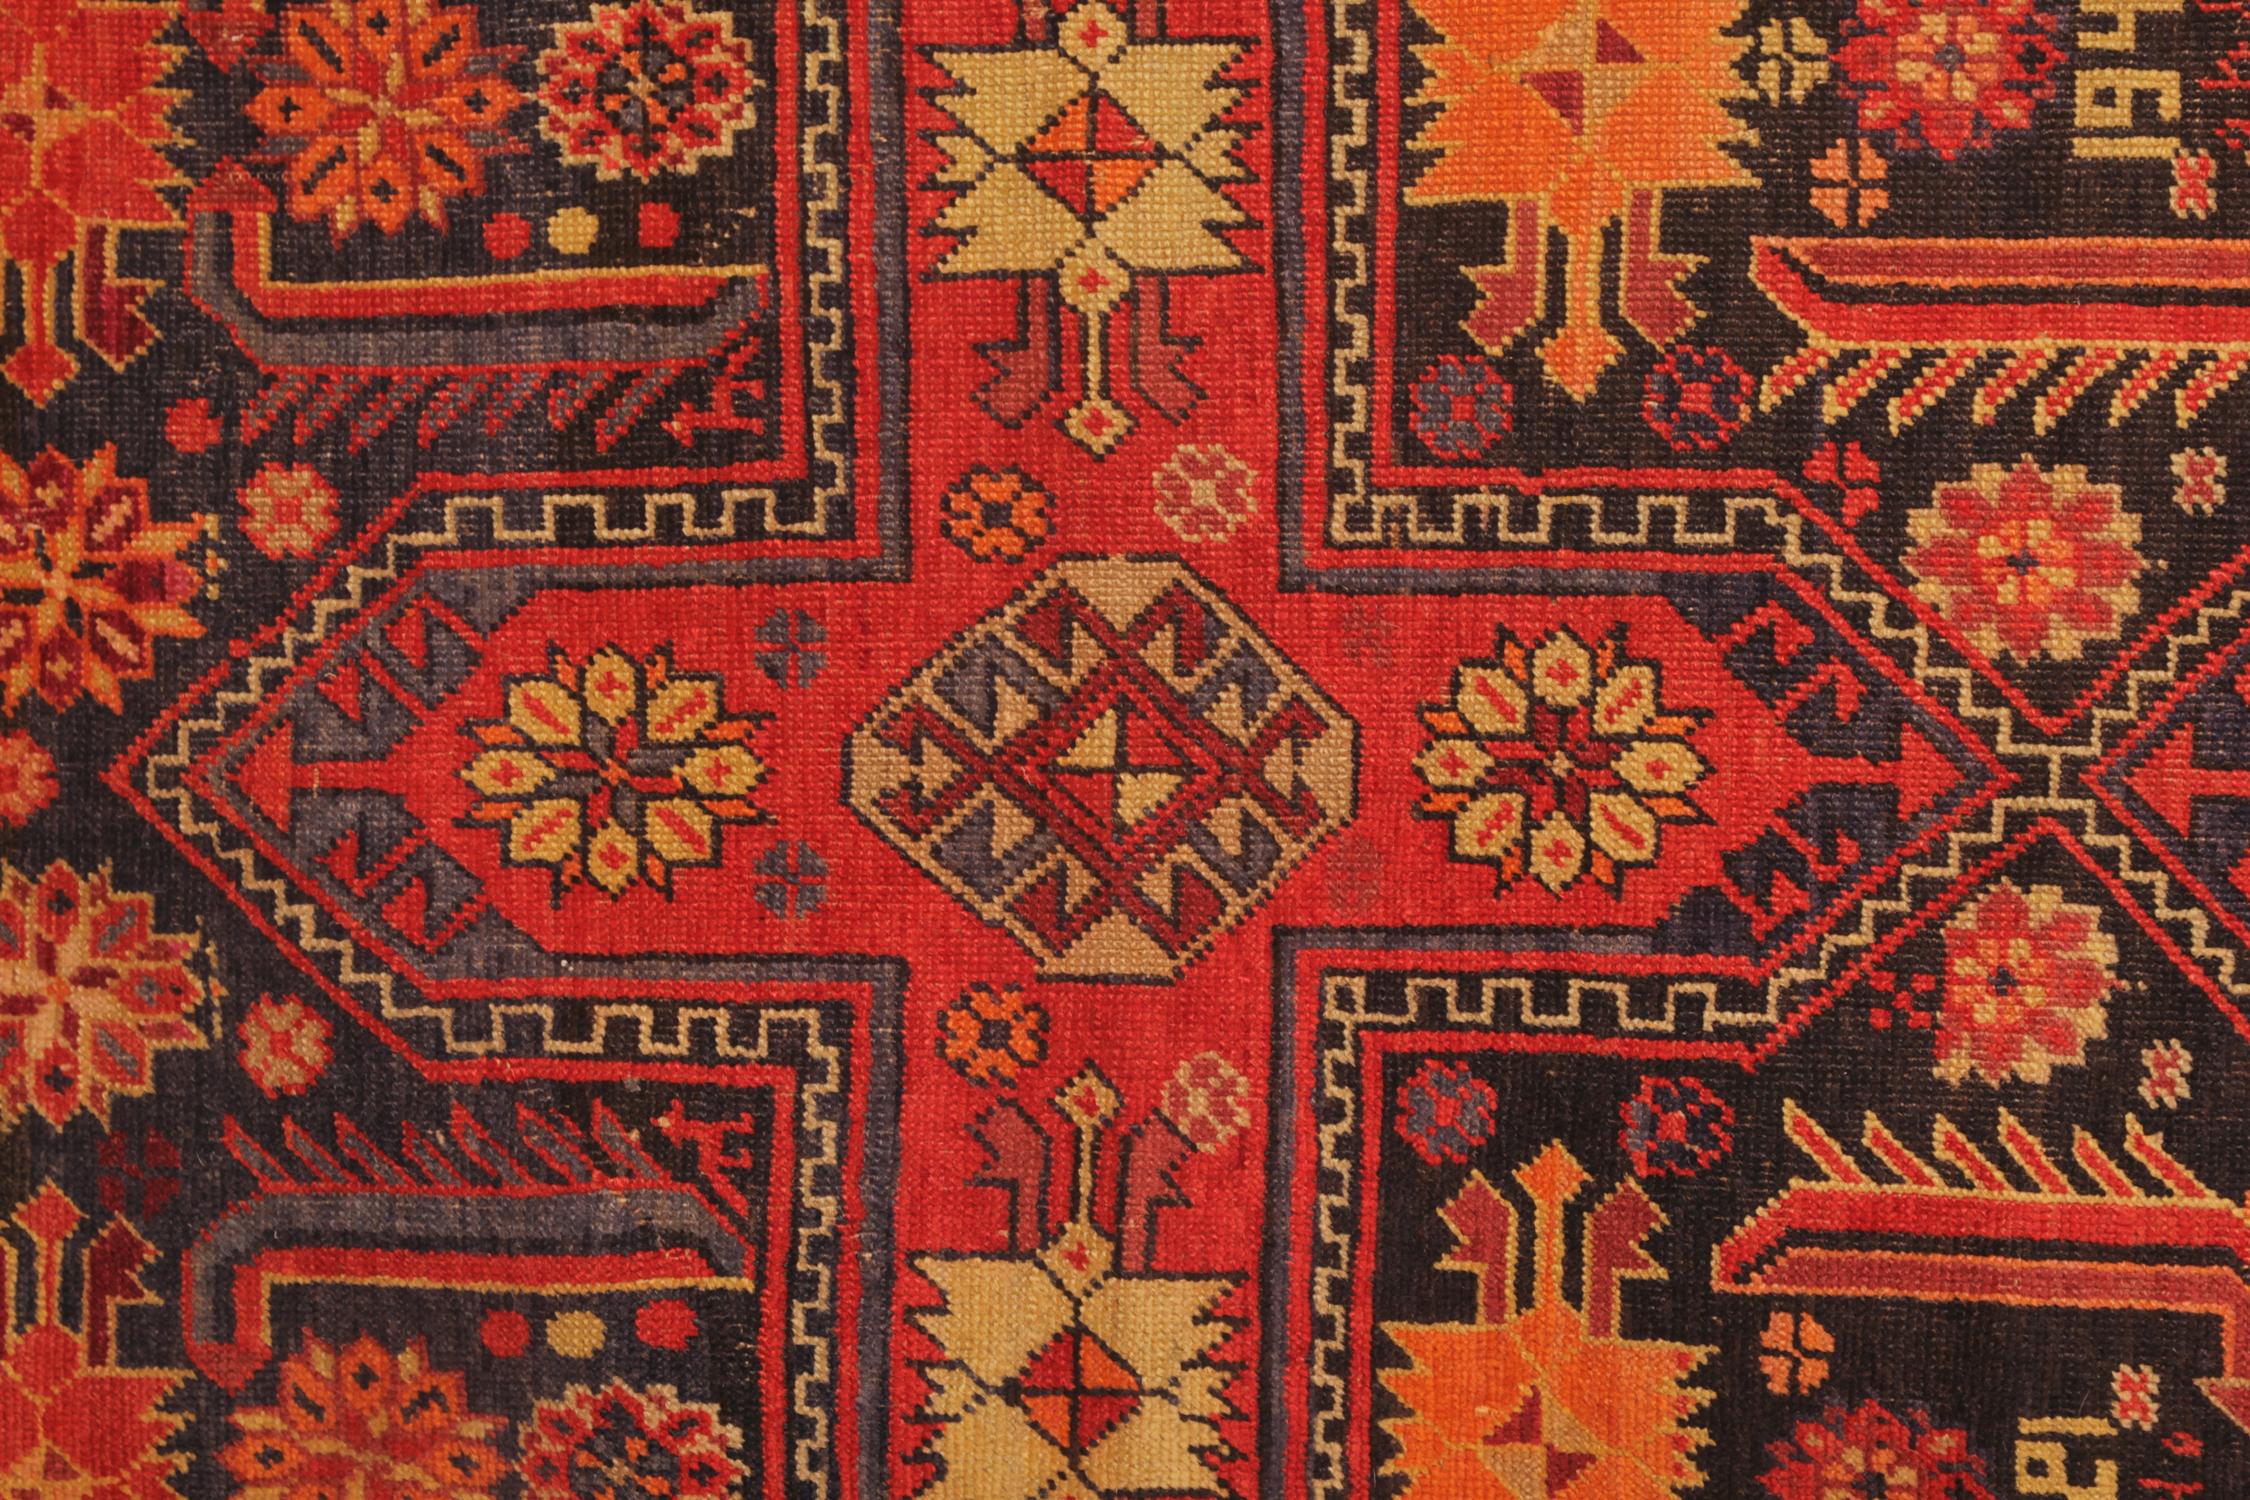 Bold Red and deep blue colours drench this vintage Caucasian Area Rug. Featuring tribal motifs in a repeat cross pattern through the center this is then enclosed by a highly detailed border. Woven in Iran, with handspul wool and cotton, this tribal